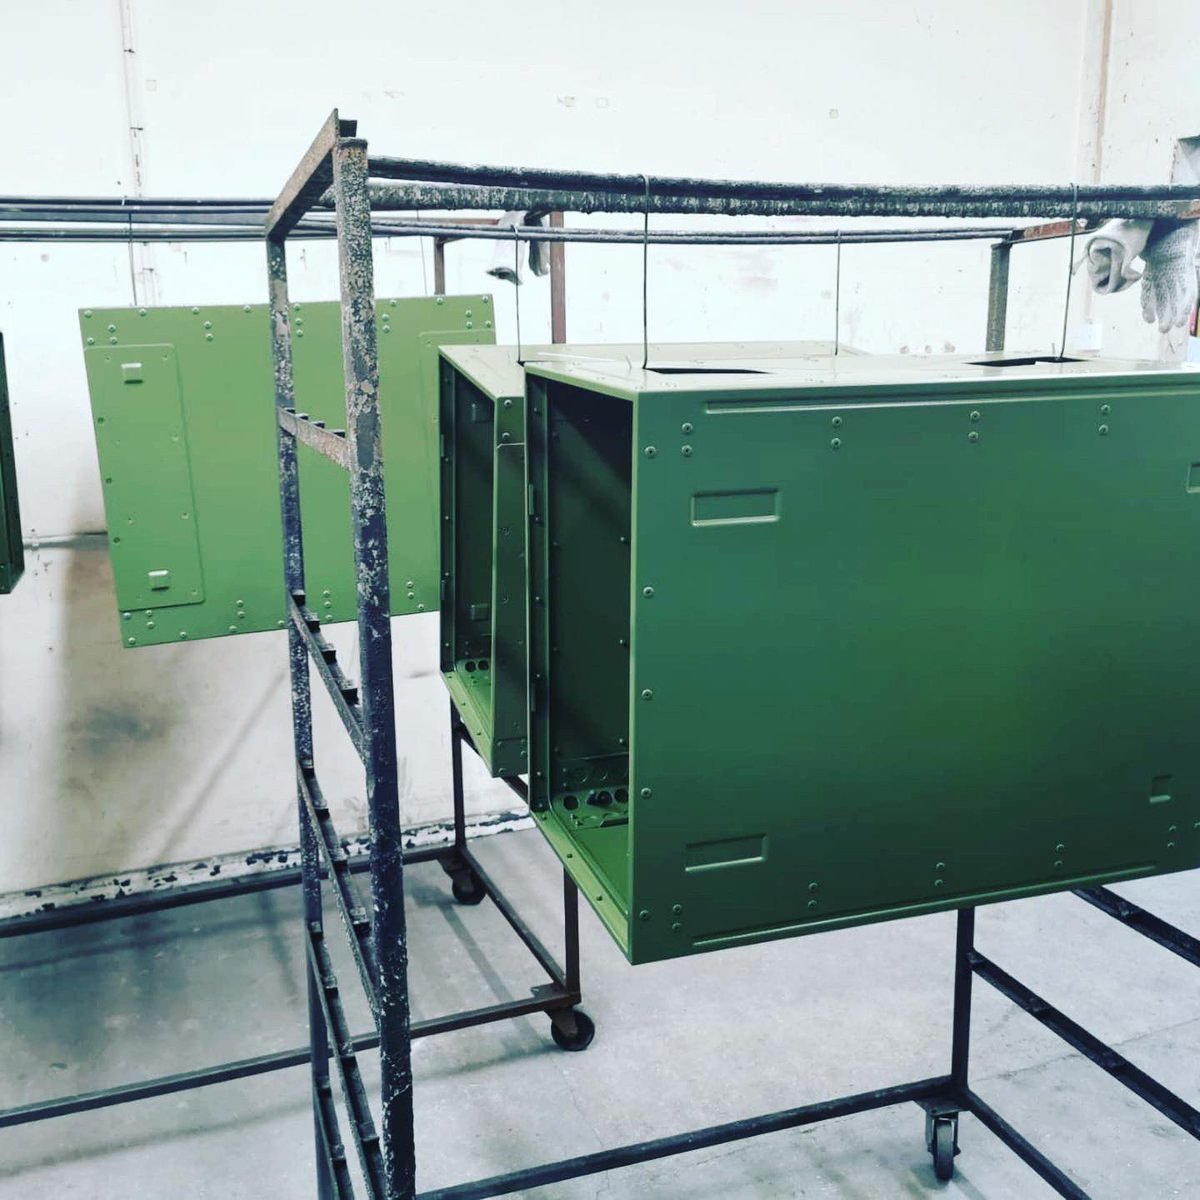 Love seeing our shock cases going through the plant. This batch will be heading to client in Spain this week. #ukmanufacturing #rackmount #aluminium #cases #ukexports